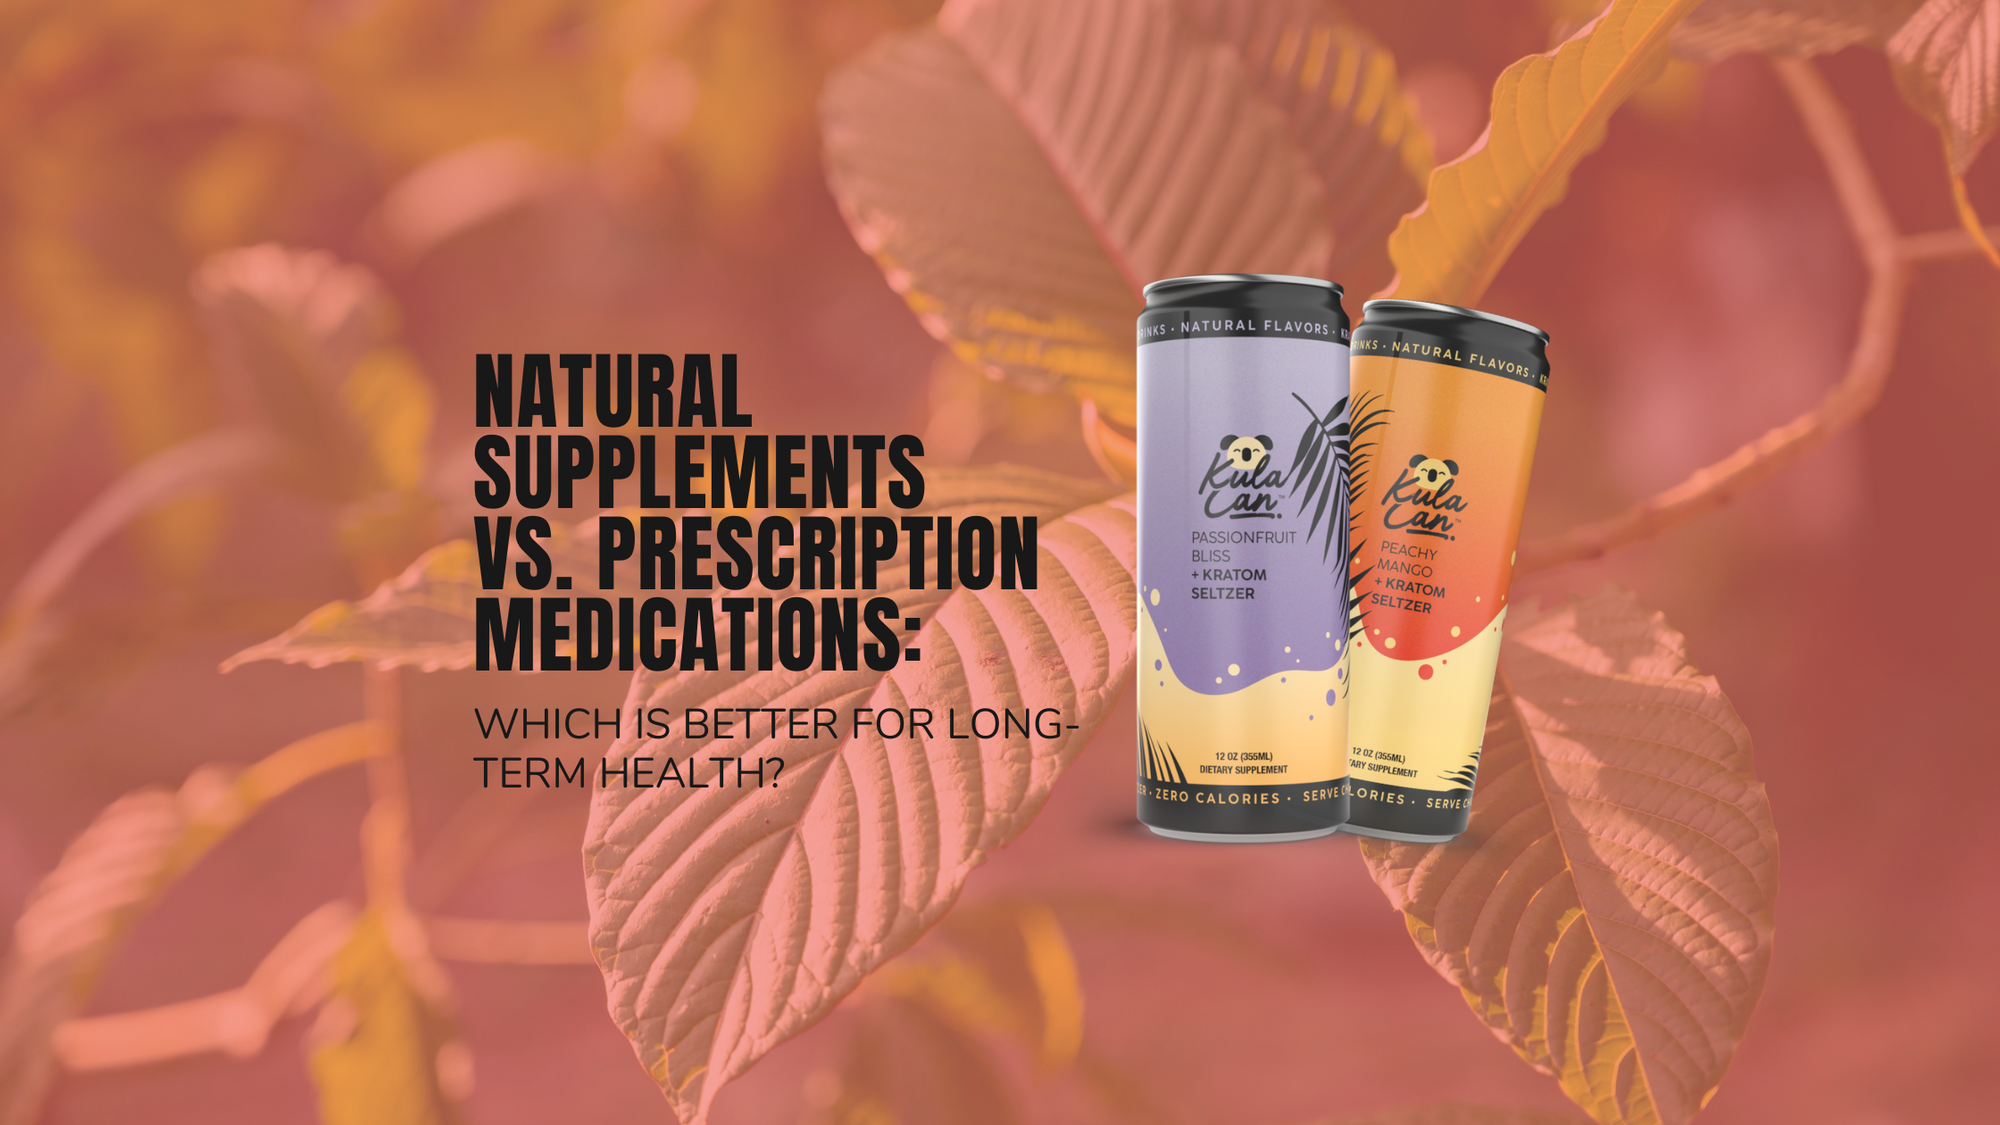 Natural Supplements vs. Prescription Medications: Which is Better for Long-Term Health?